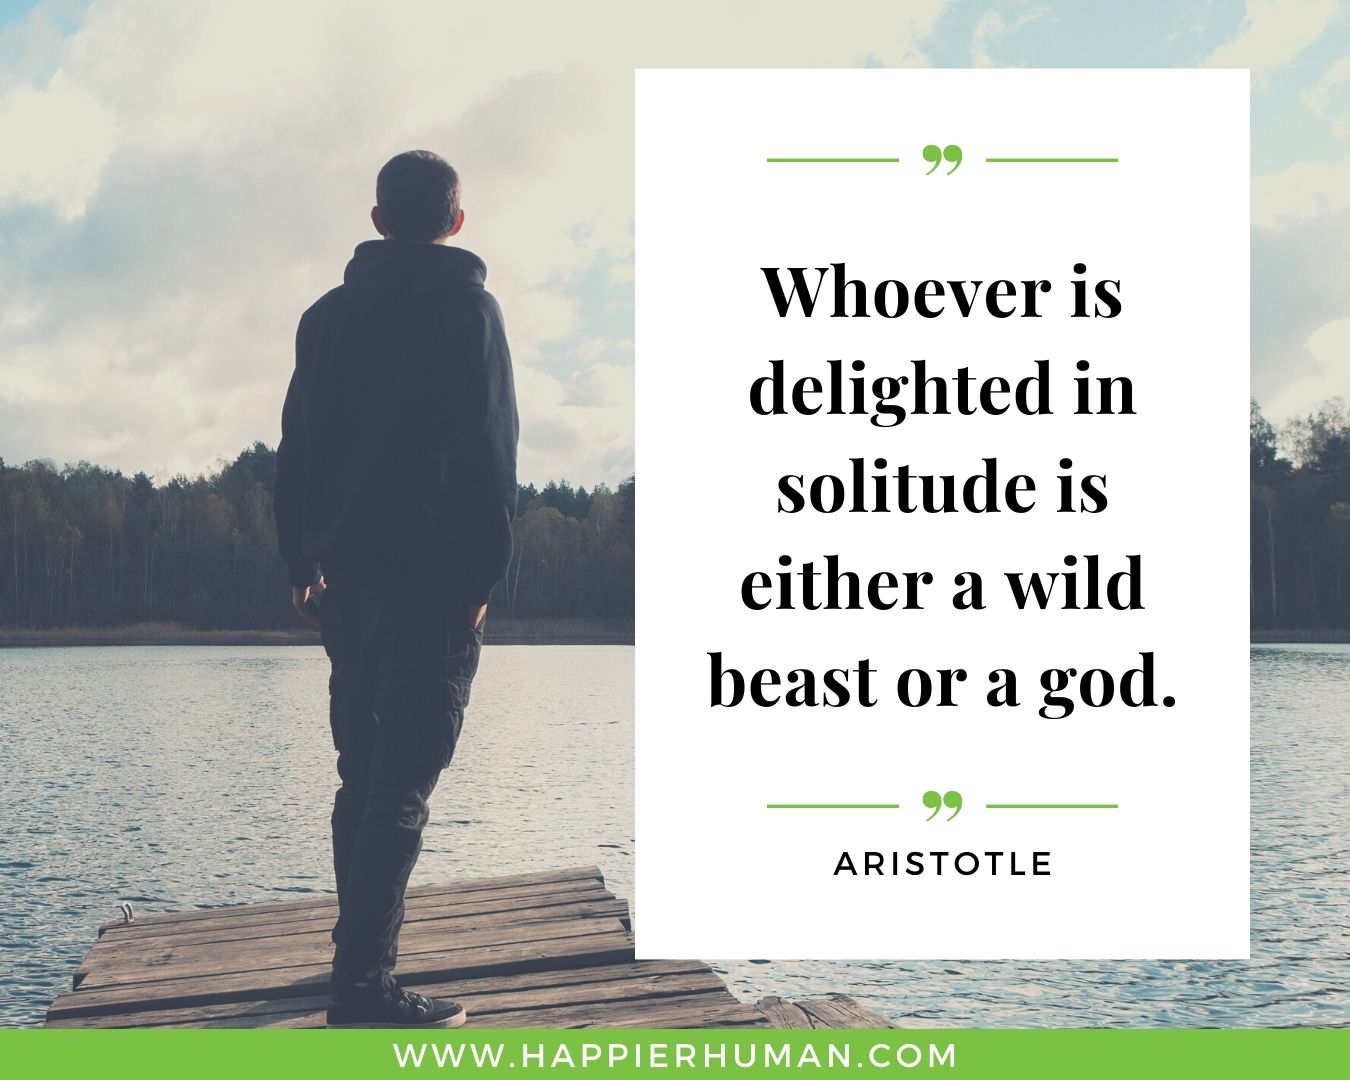 Loneliness Quotes - “Whoever is delighted in solitude is either a wild beast or a god.”– Aristotle